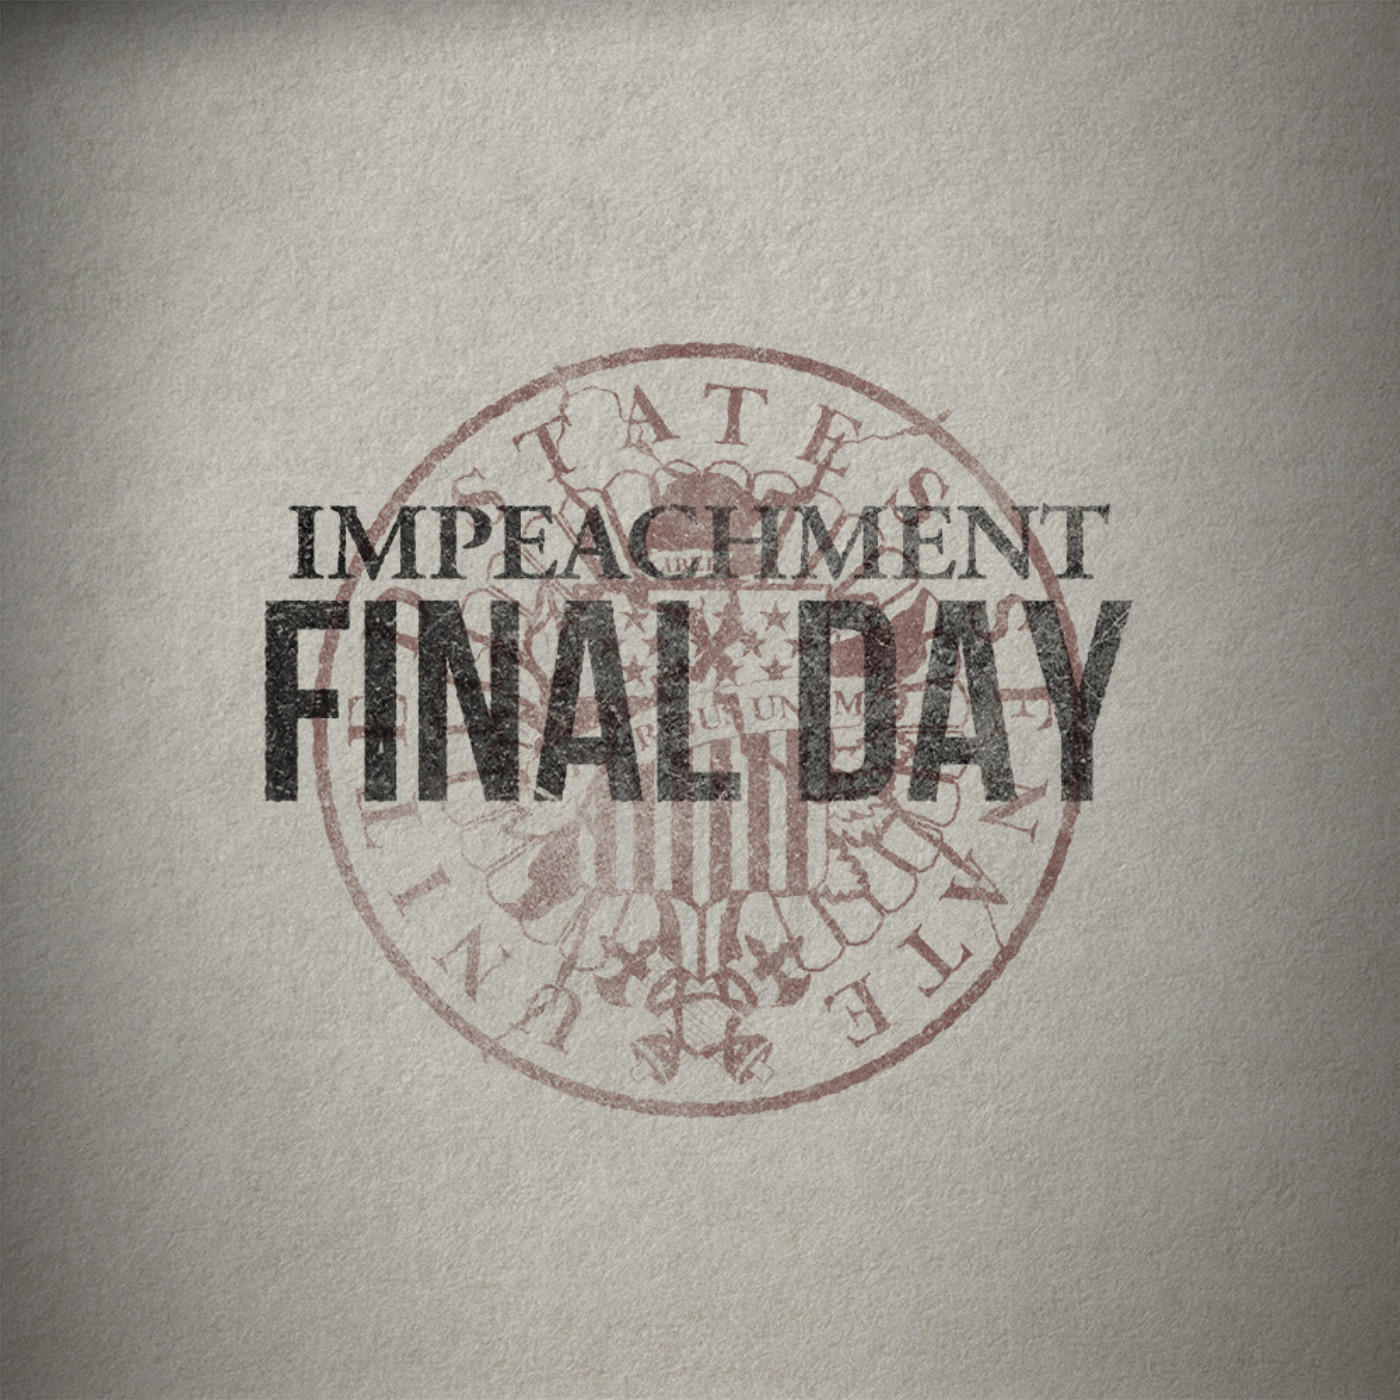 The Impeachment: Final Day